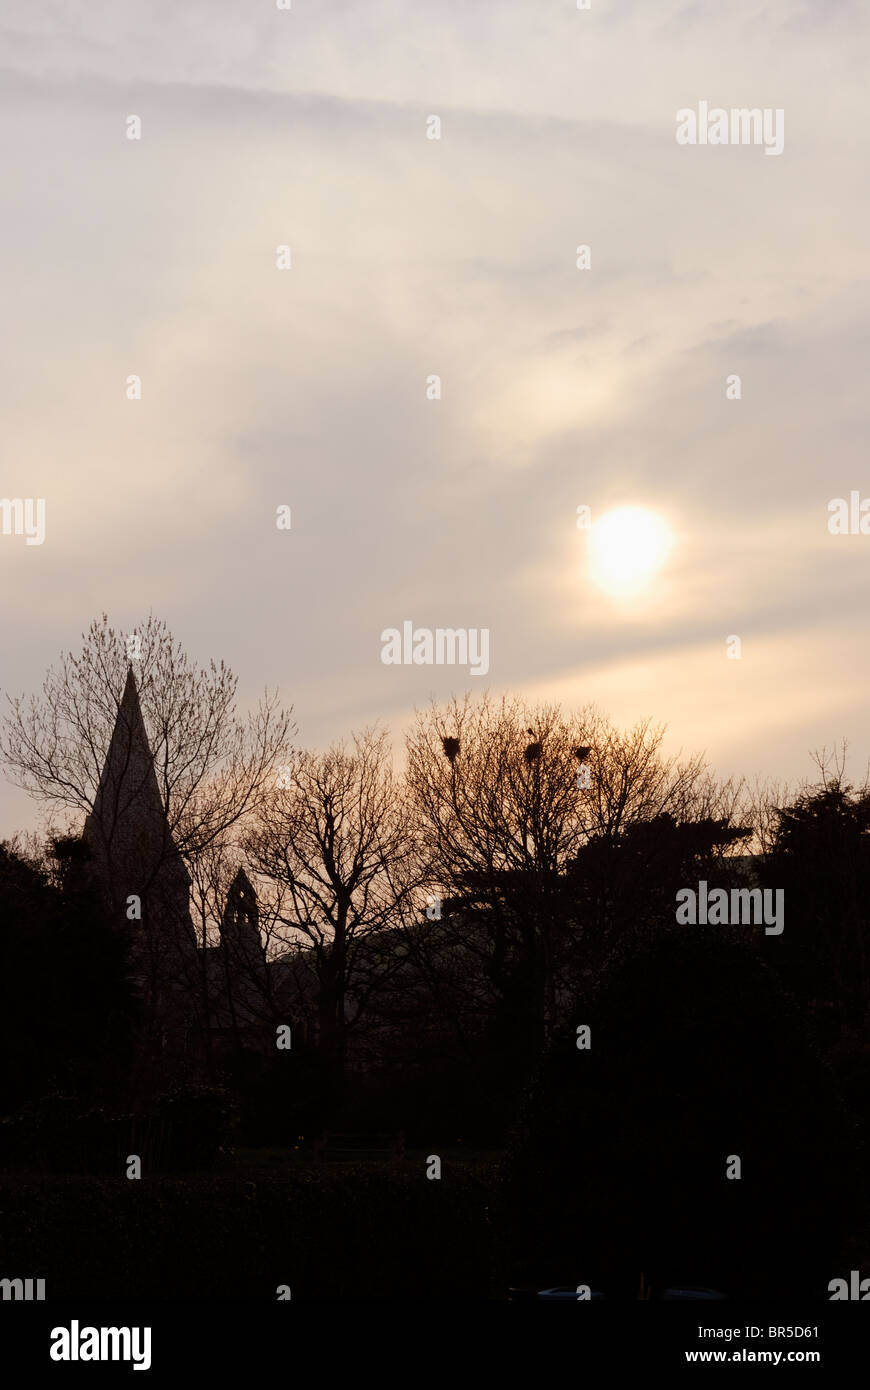 Llanrhystud Church with Rookery in the trees at sunset in Winter, Wales. Stock Photo